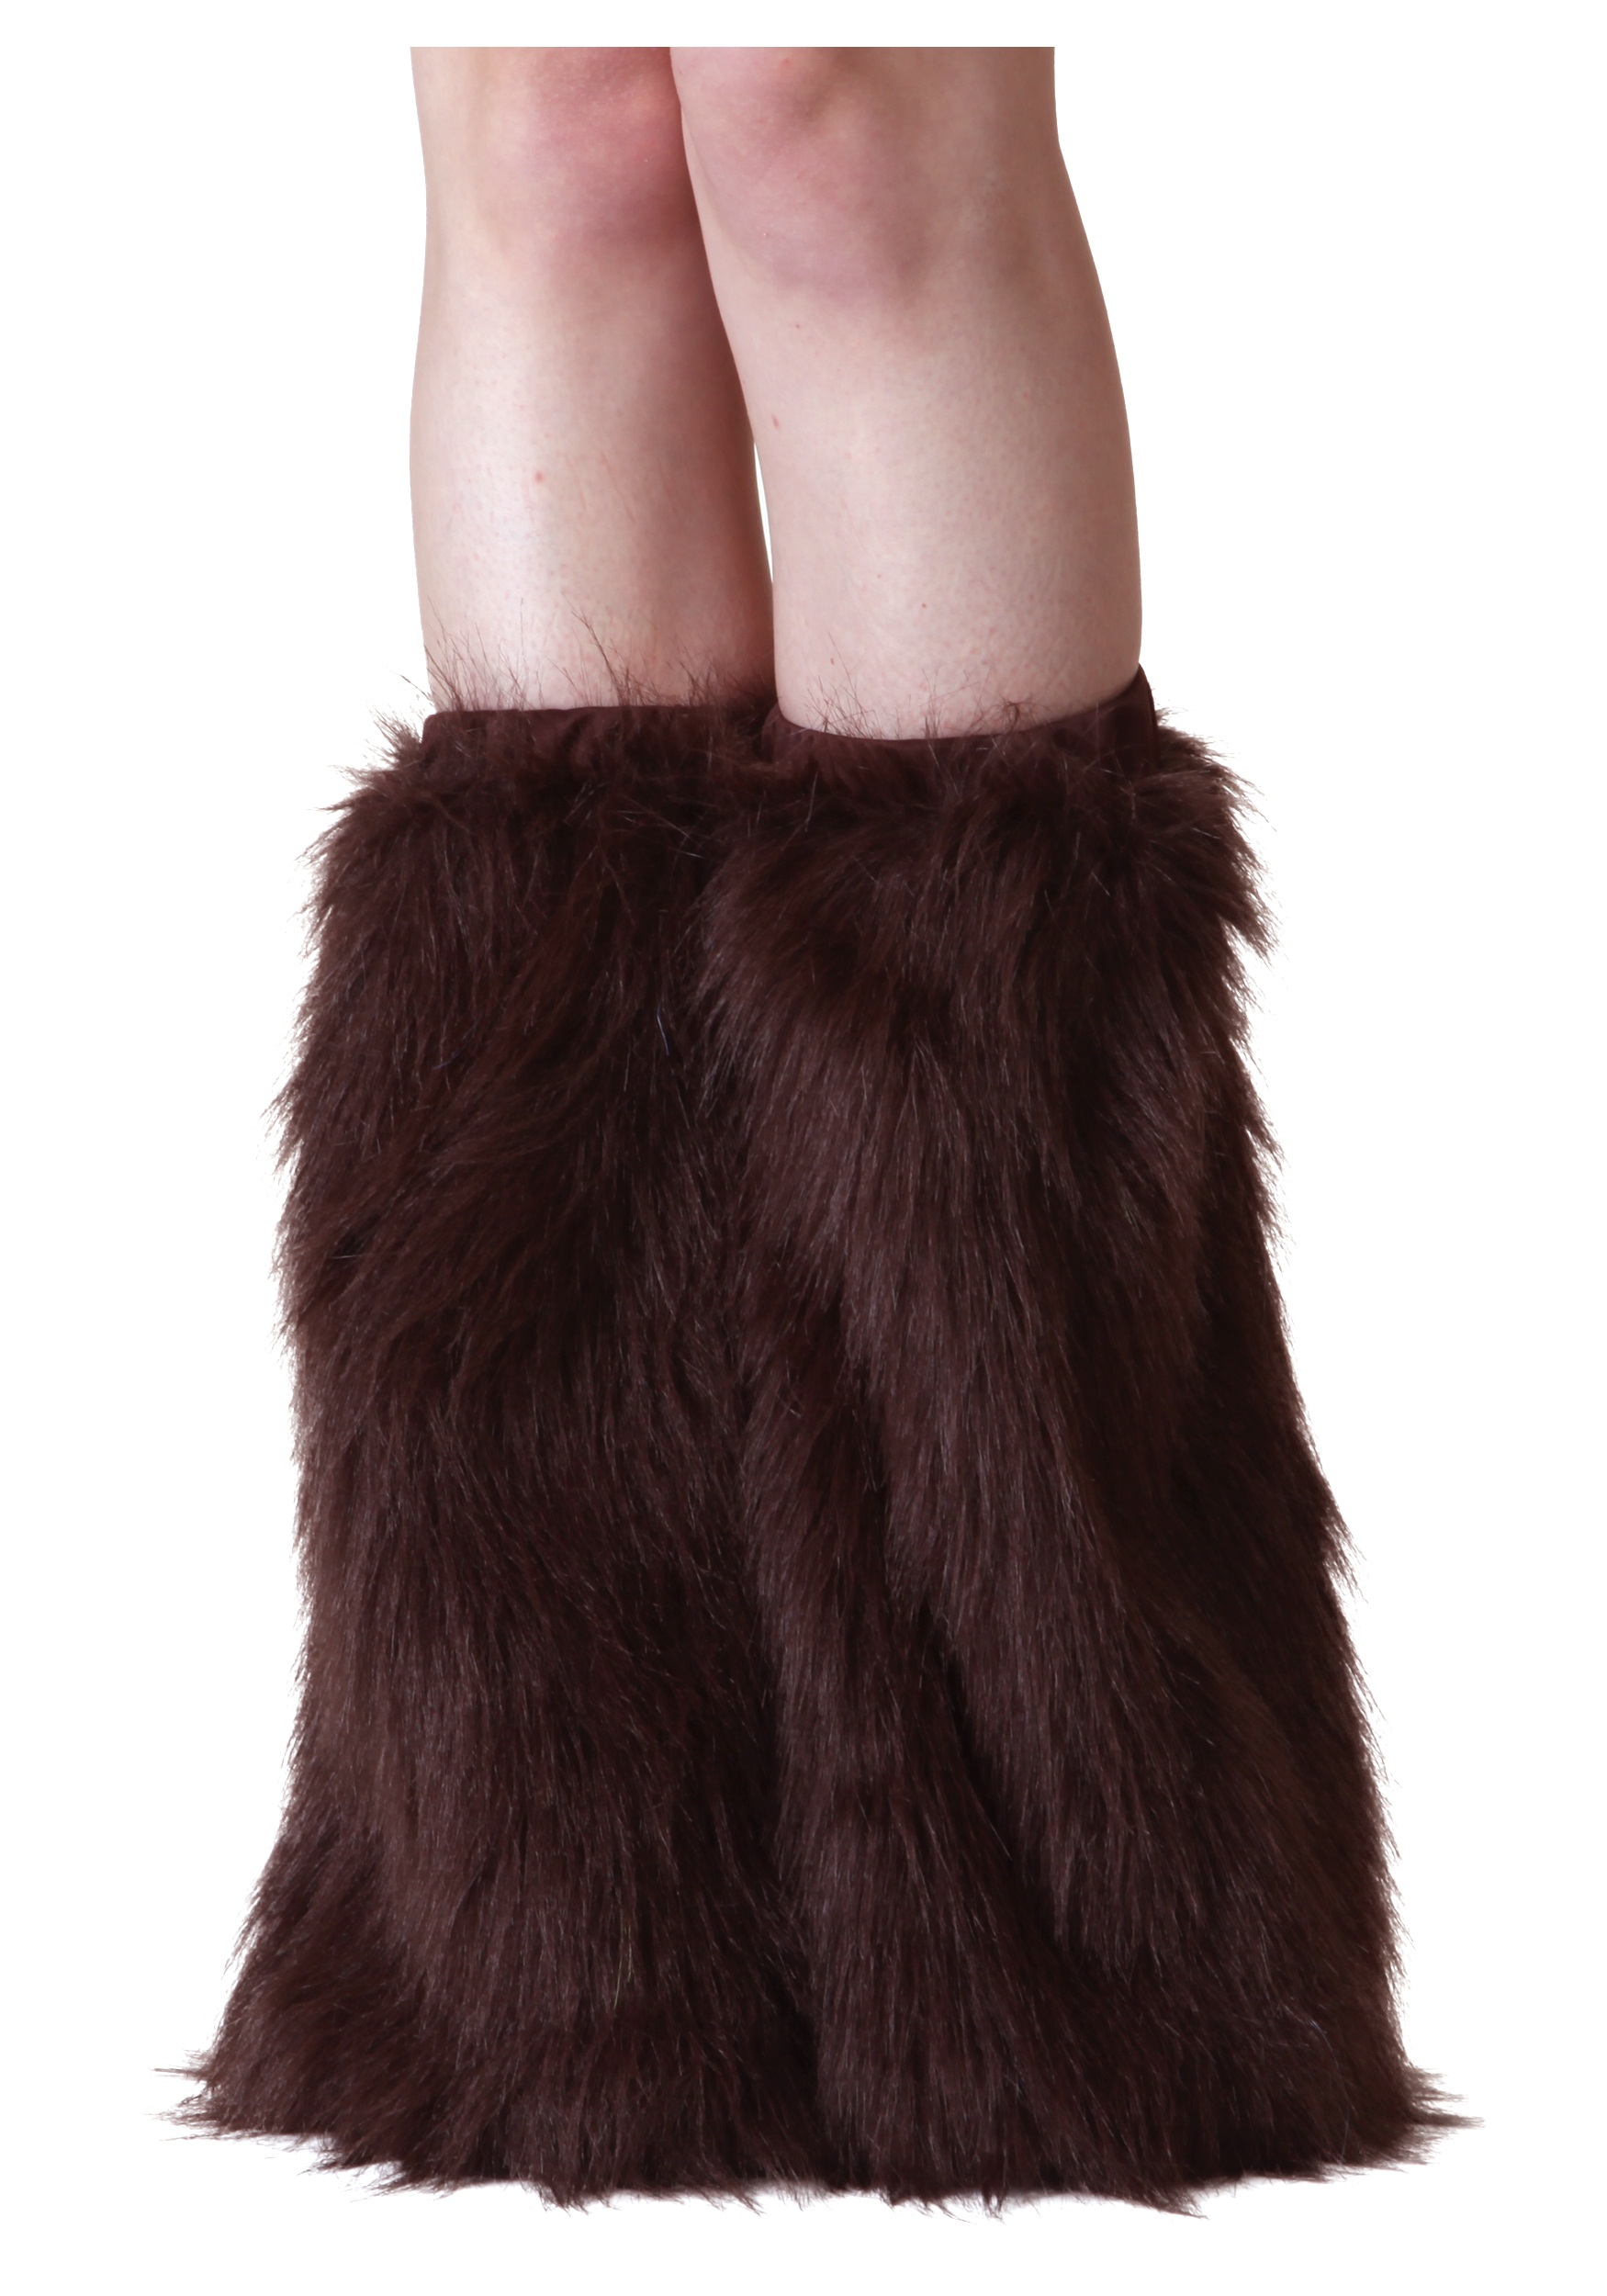 Brown Furry Boot Covers for Adults